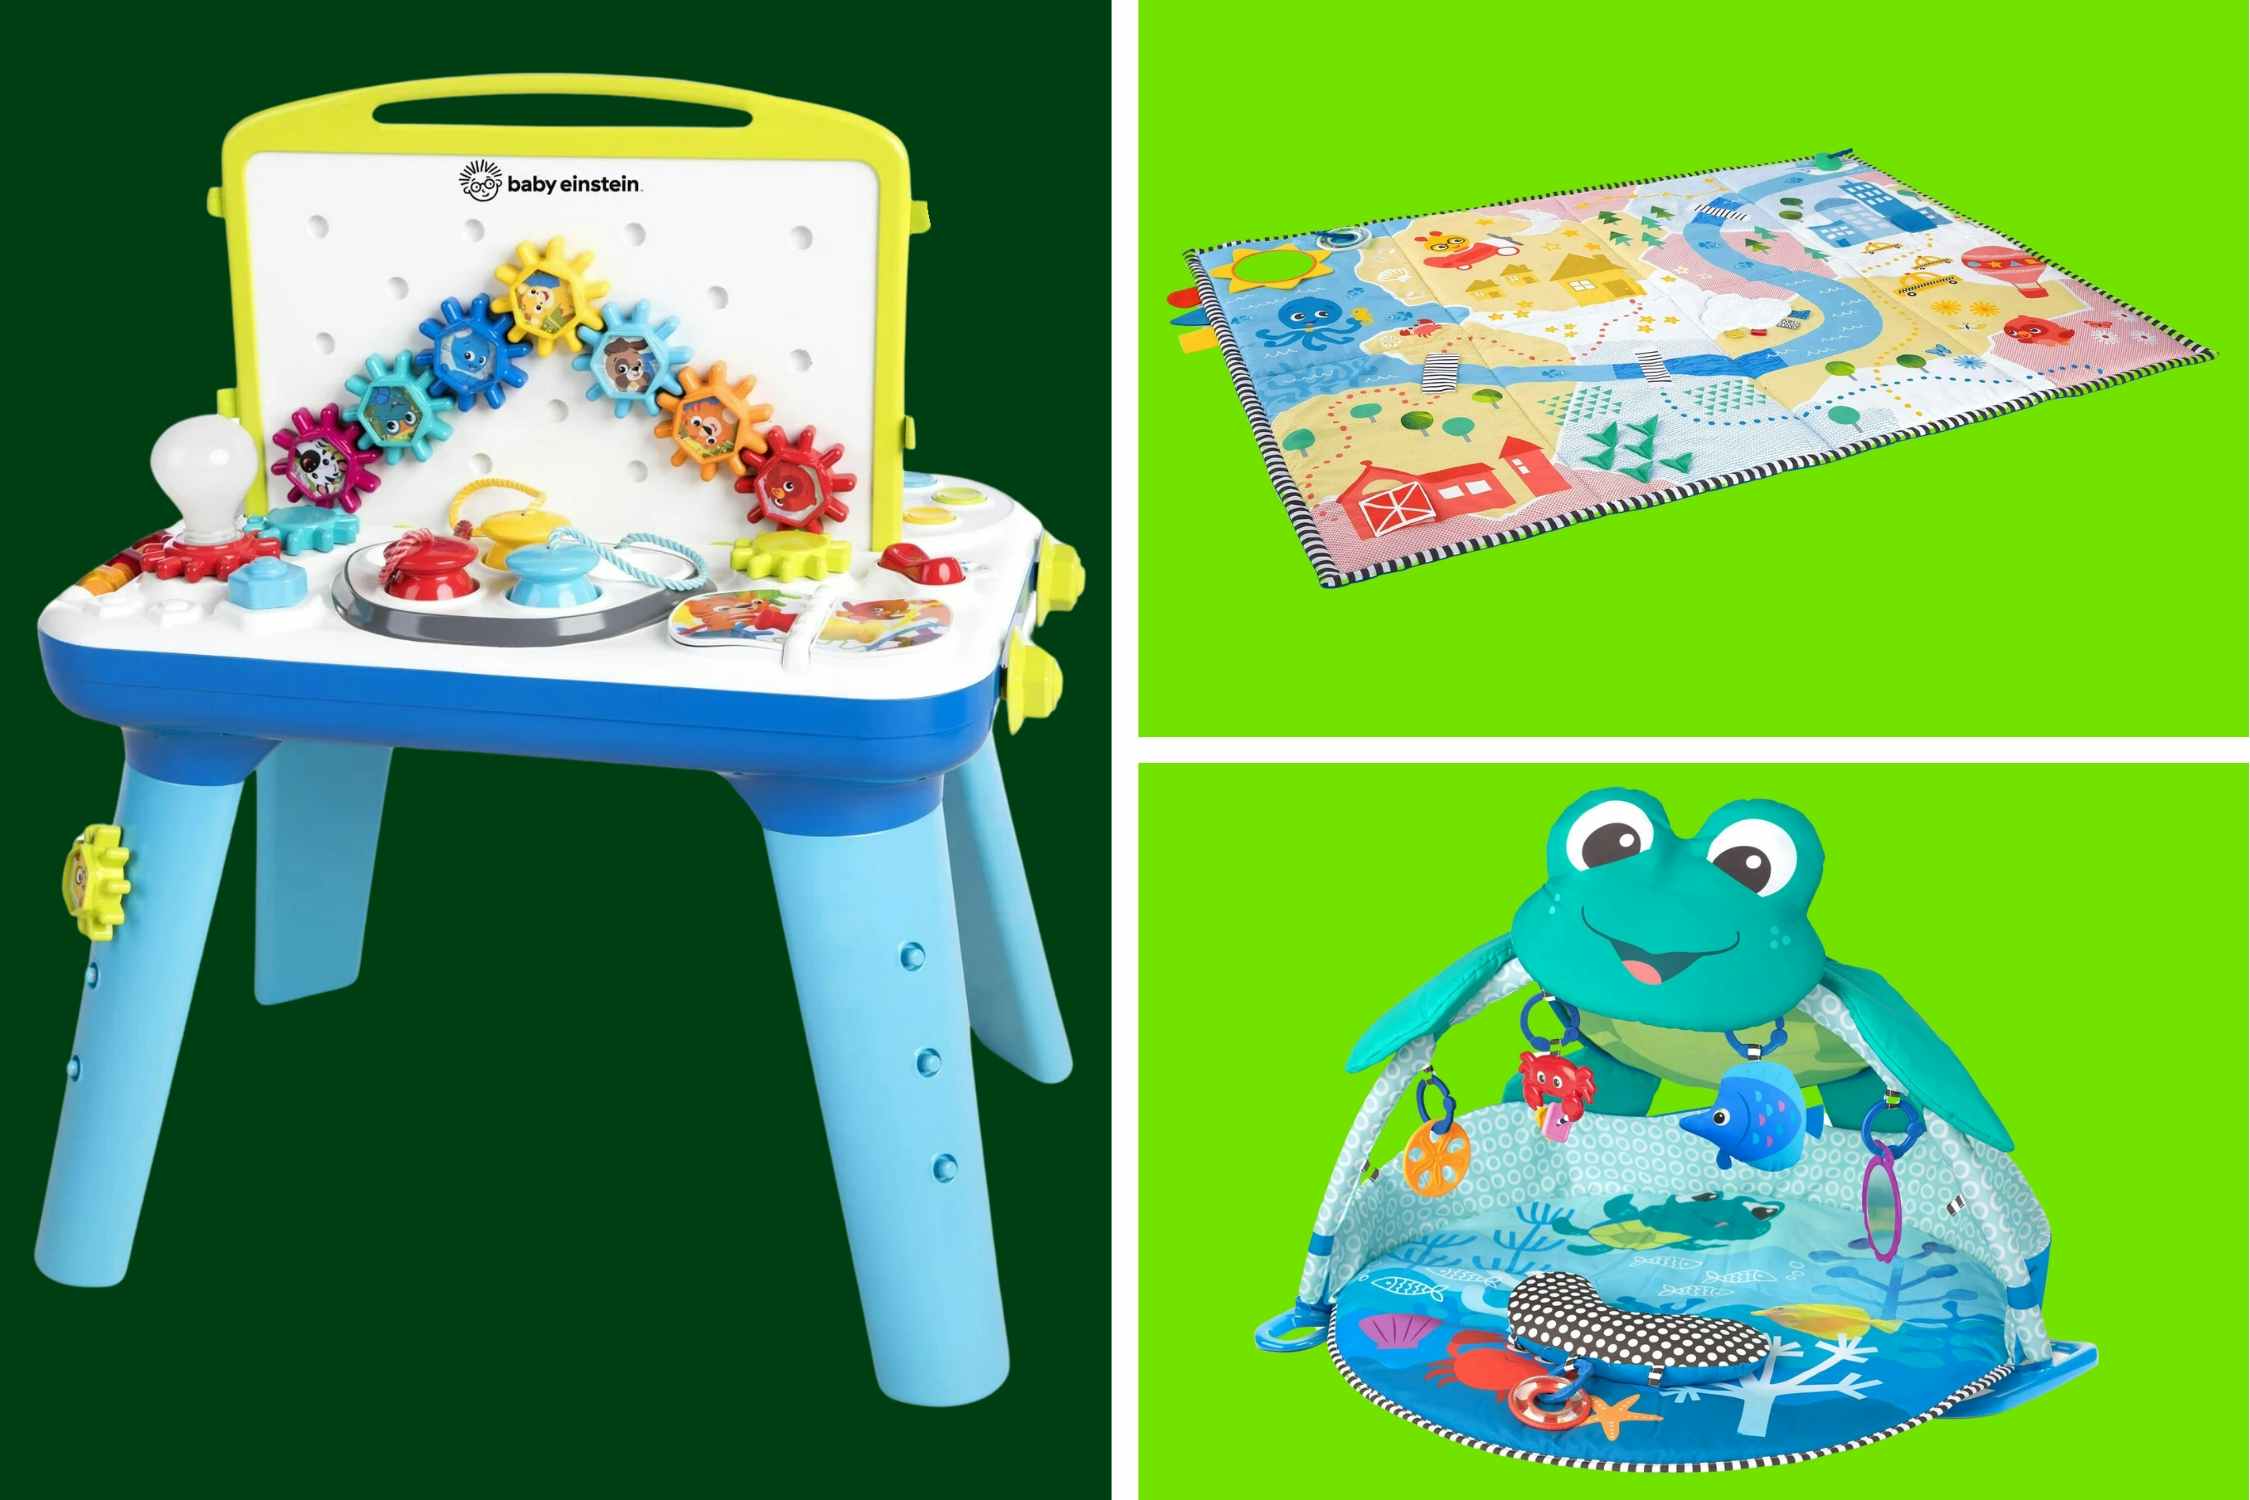 Baby Einstein Activity Centers at Walmart: $16 Play Mat, $30 Table, and More